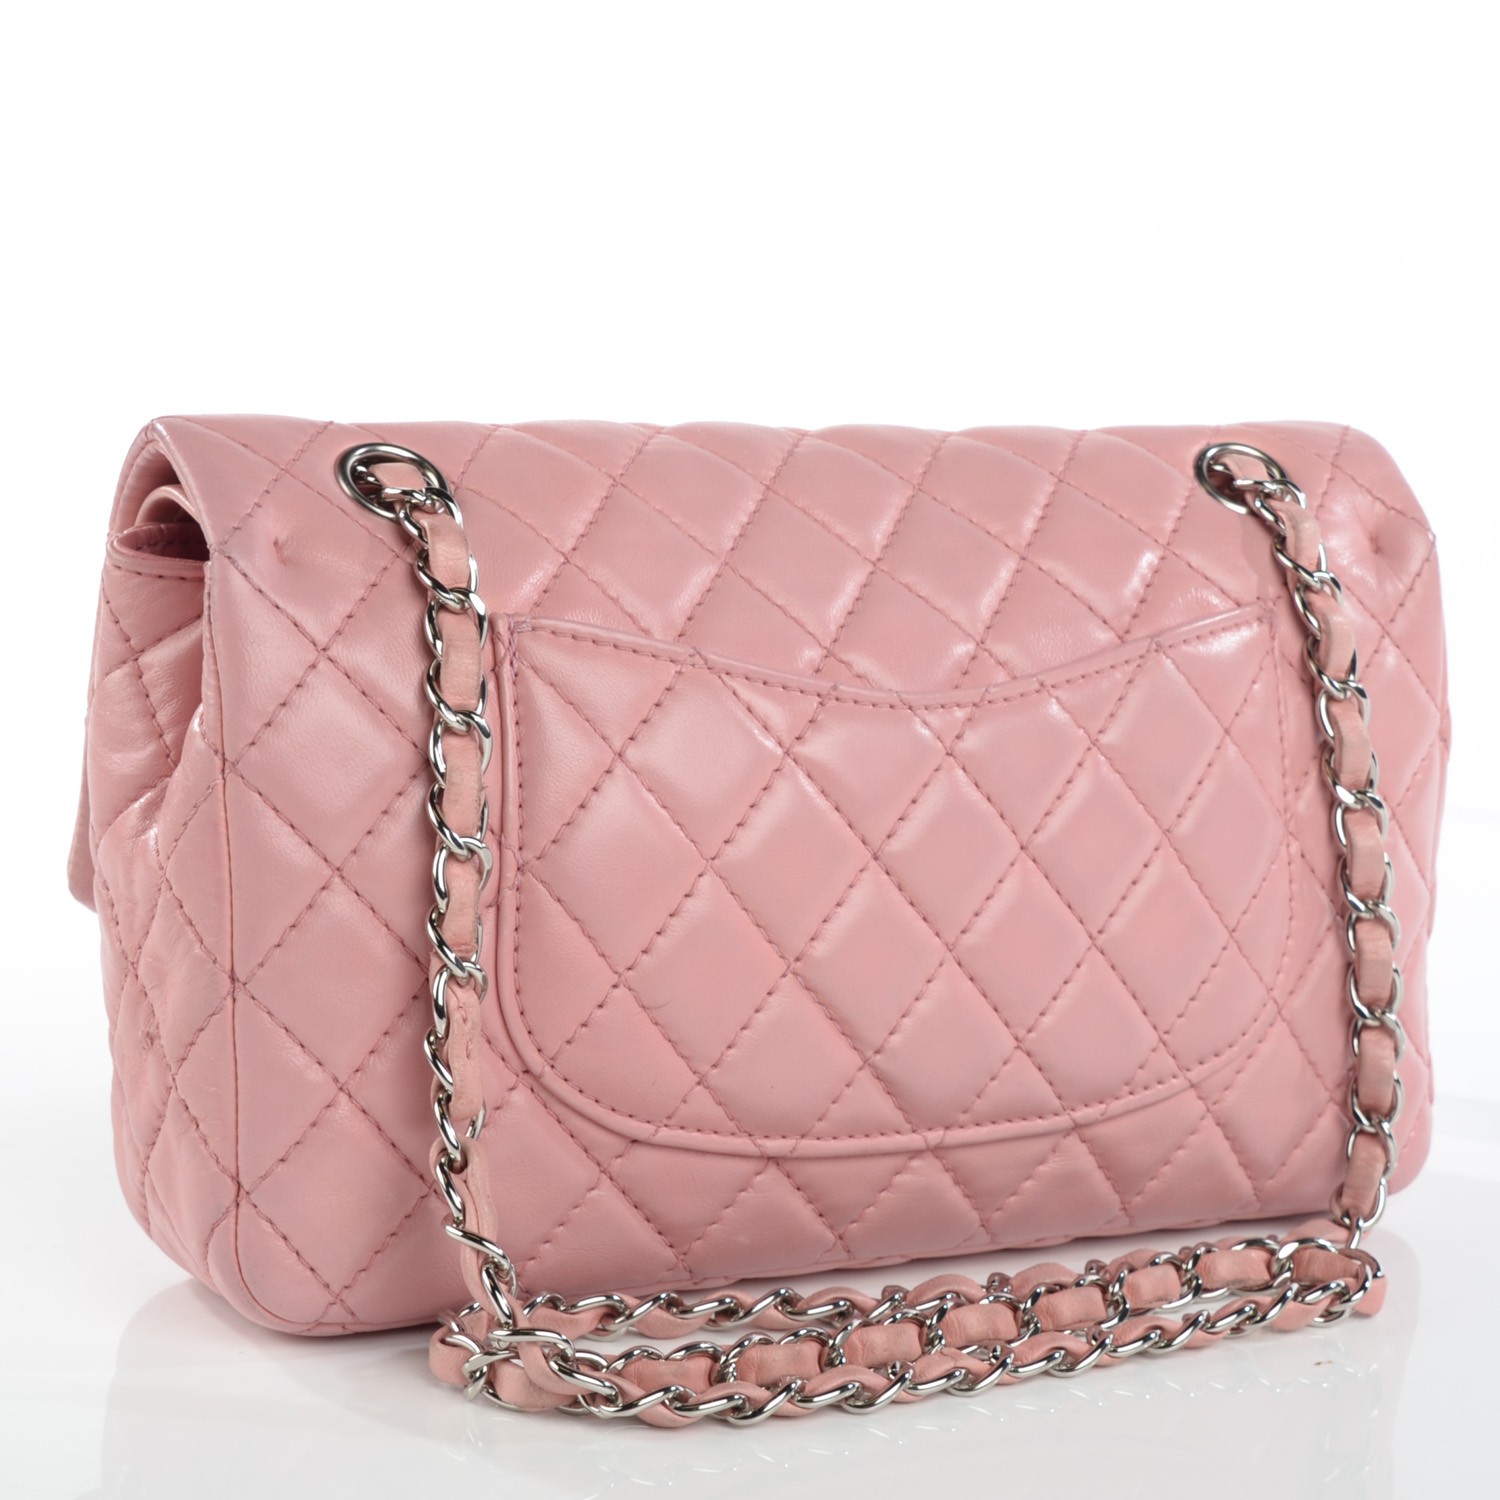 CHANEL Lambskin Quilted Medium Double Flap Light Pink 119915